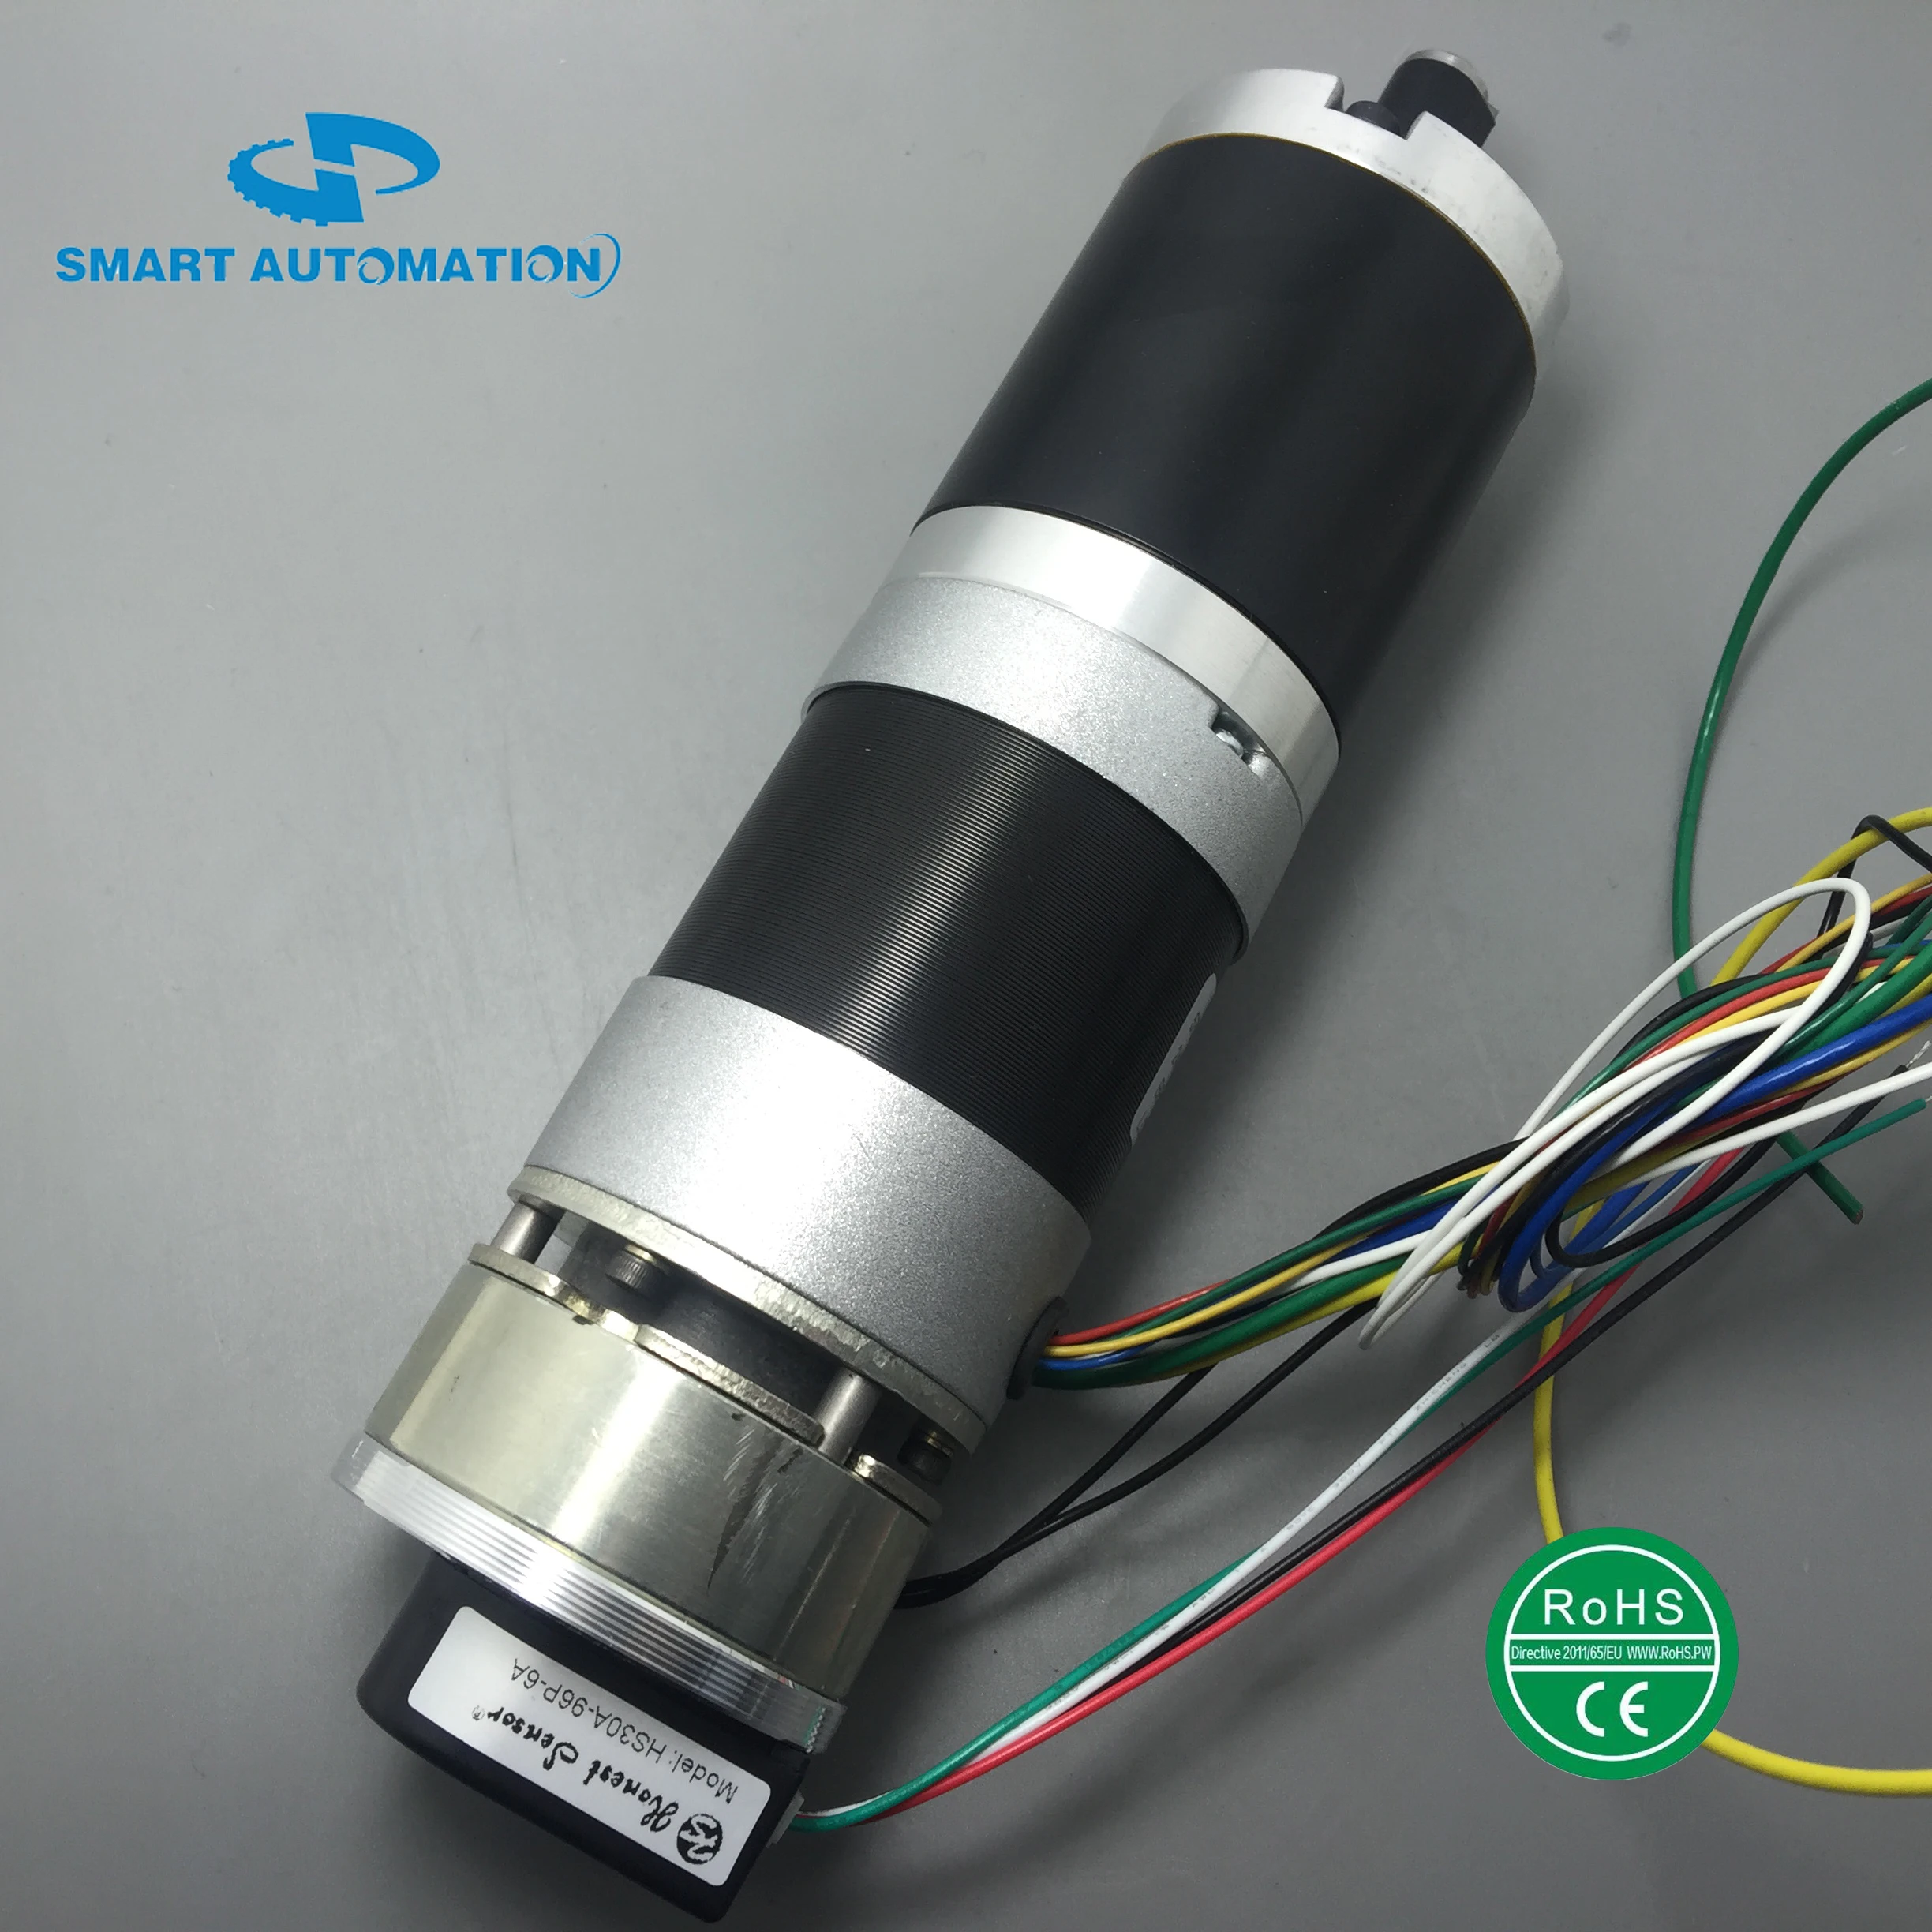 56JXE.57BL Low Cost High Torque Planetary Gear Reducer BLDC Motors Dc Brushless 3Nm 5Nm 10Nm 20Nm upto 45Nm